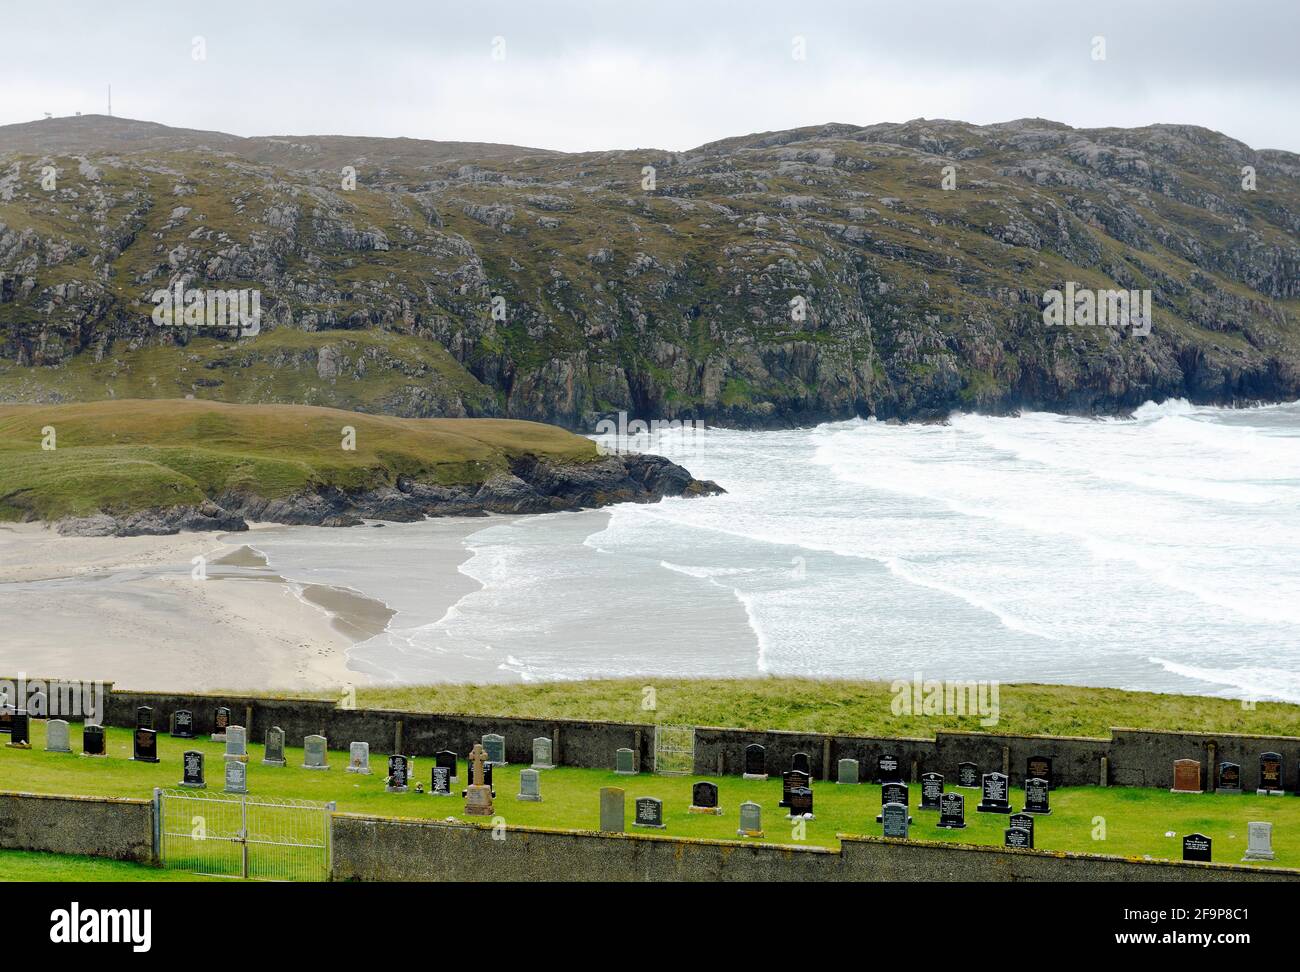 New burial ground dating from 1960s at the village of Valtos aka Bhaltos in western Lewis, Outer Hebrides, Scotland. Looking west over Cliff Beach Stock Photo